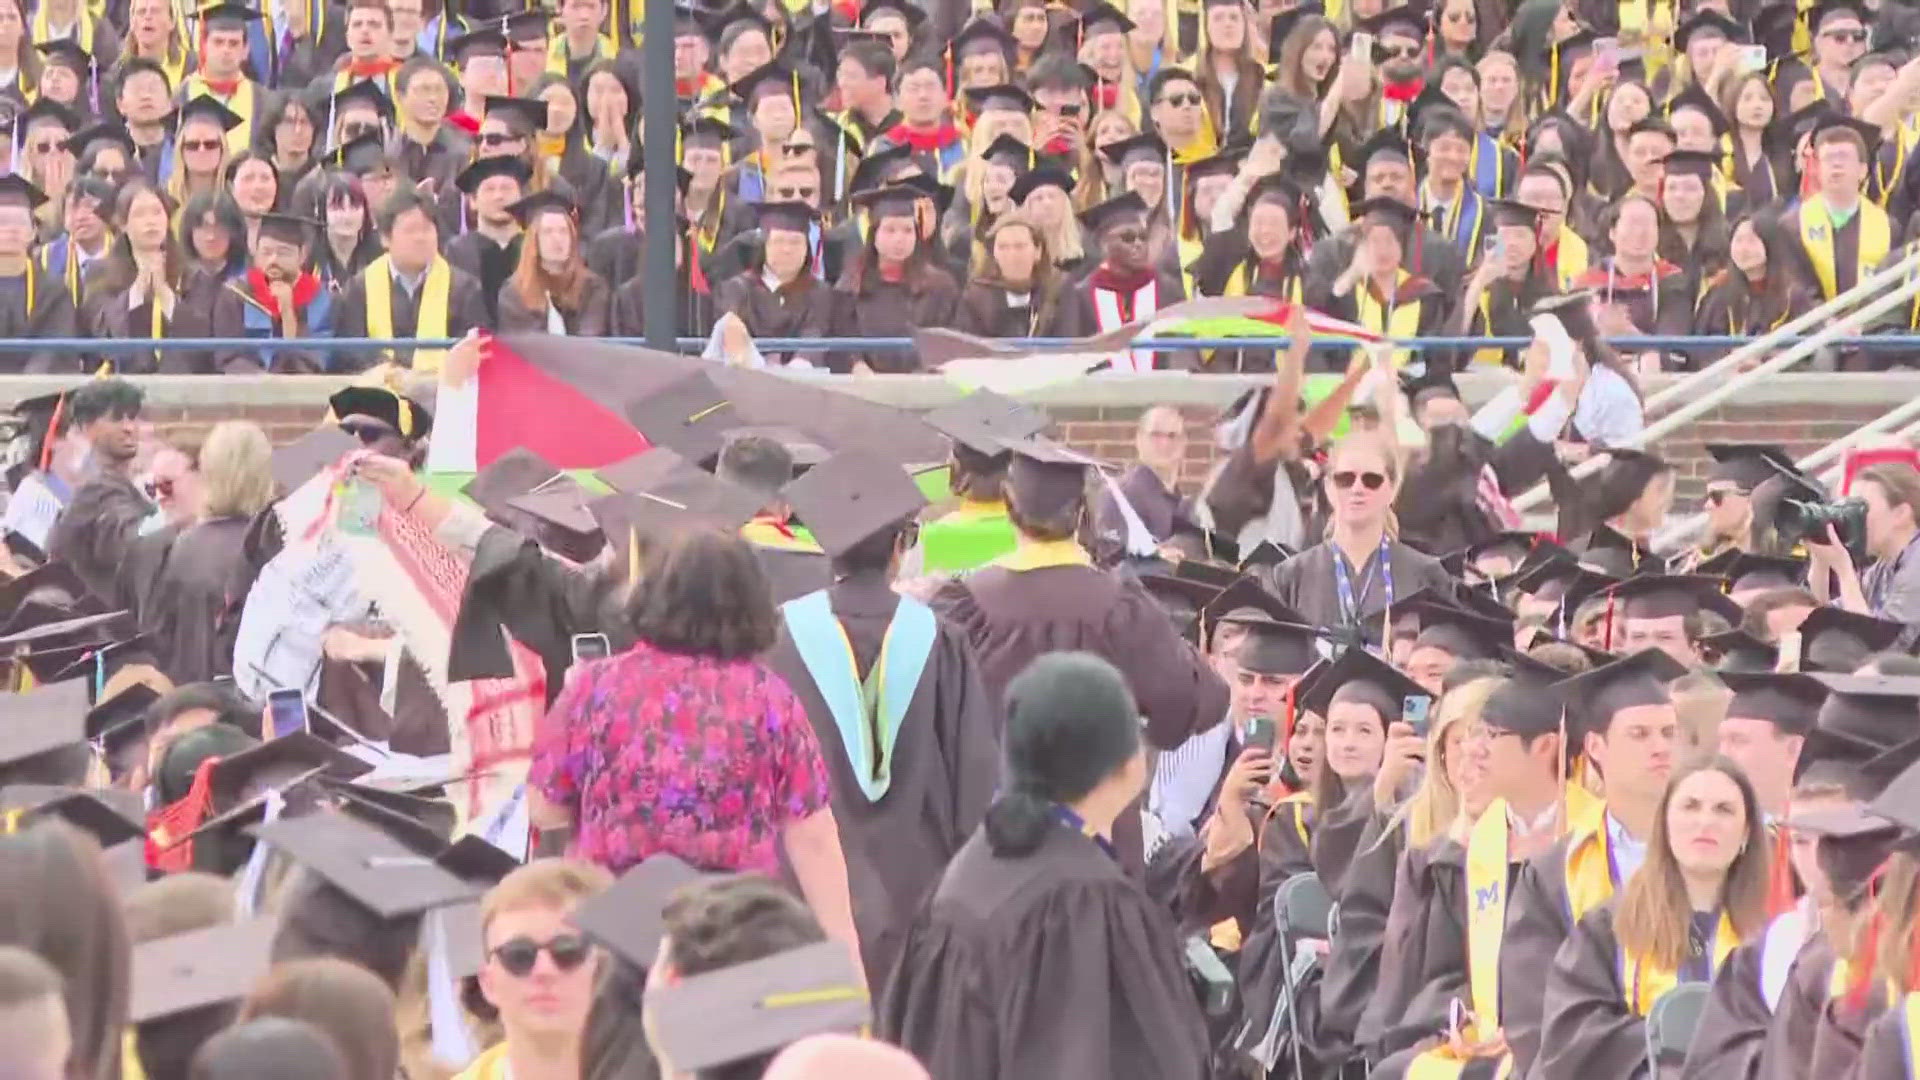 Pro-Palestinian protestors staged demonstrations at commencement ceremonies. In Texas, protestors are preparing anther demonstration at UT Austin.